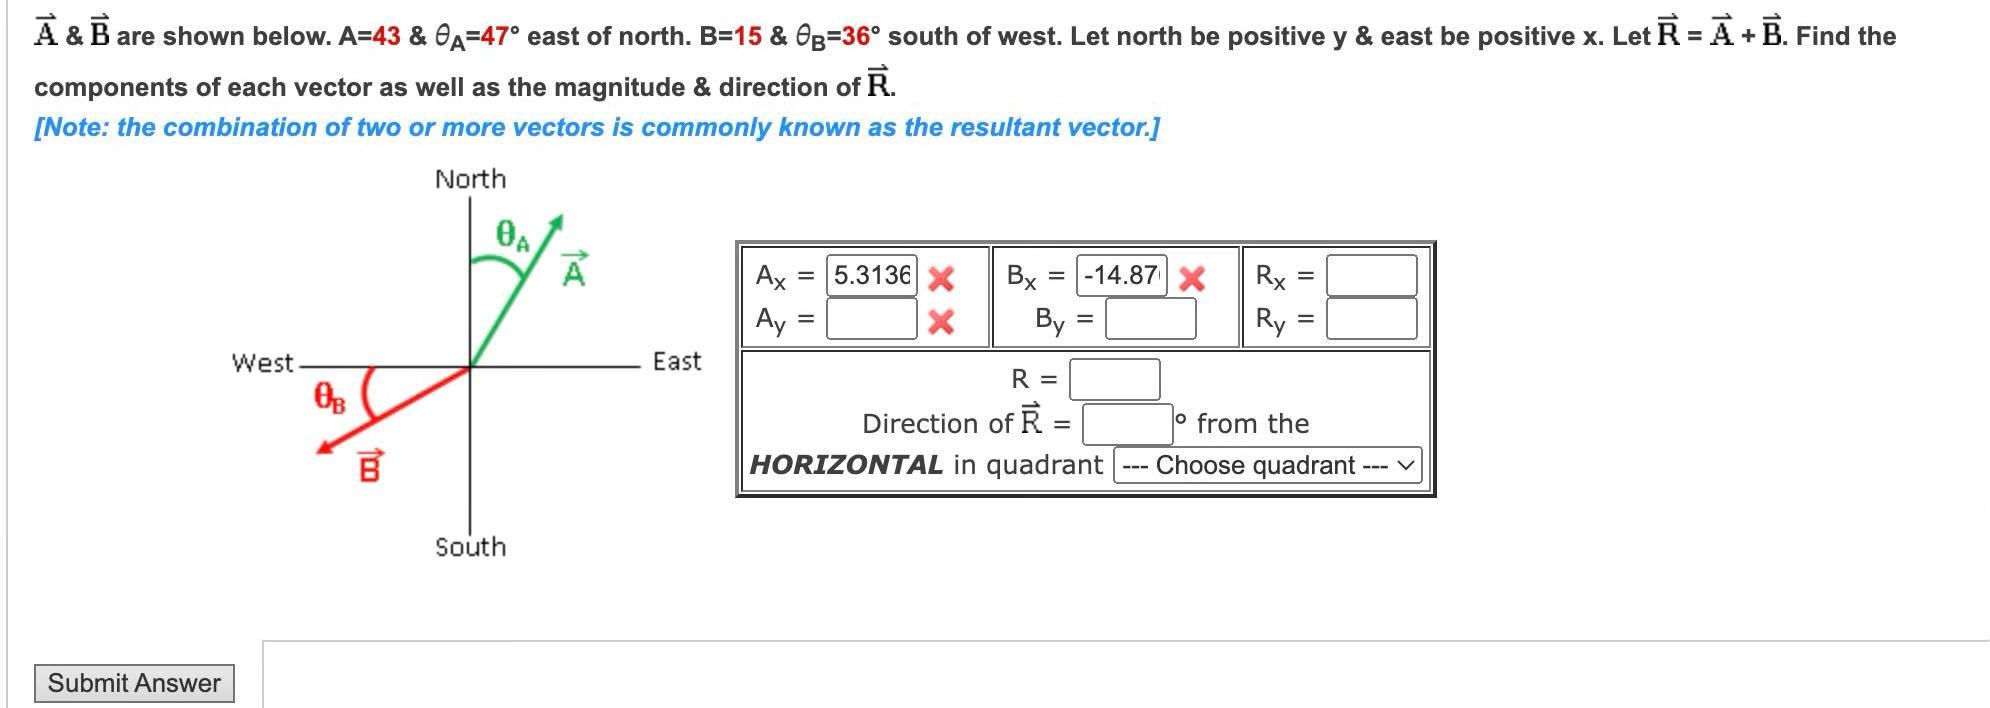 A & B are shown below. A=43 & A=47 east of north. B=15 & 0g=36 south of west. Let north be positive y & east